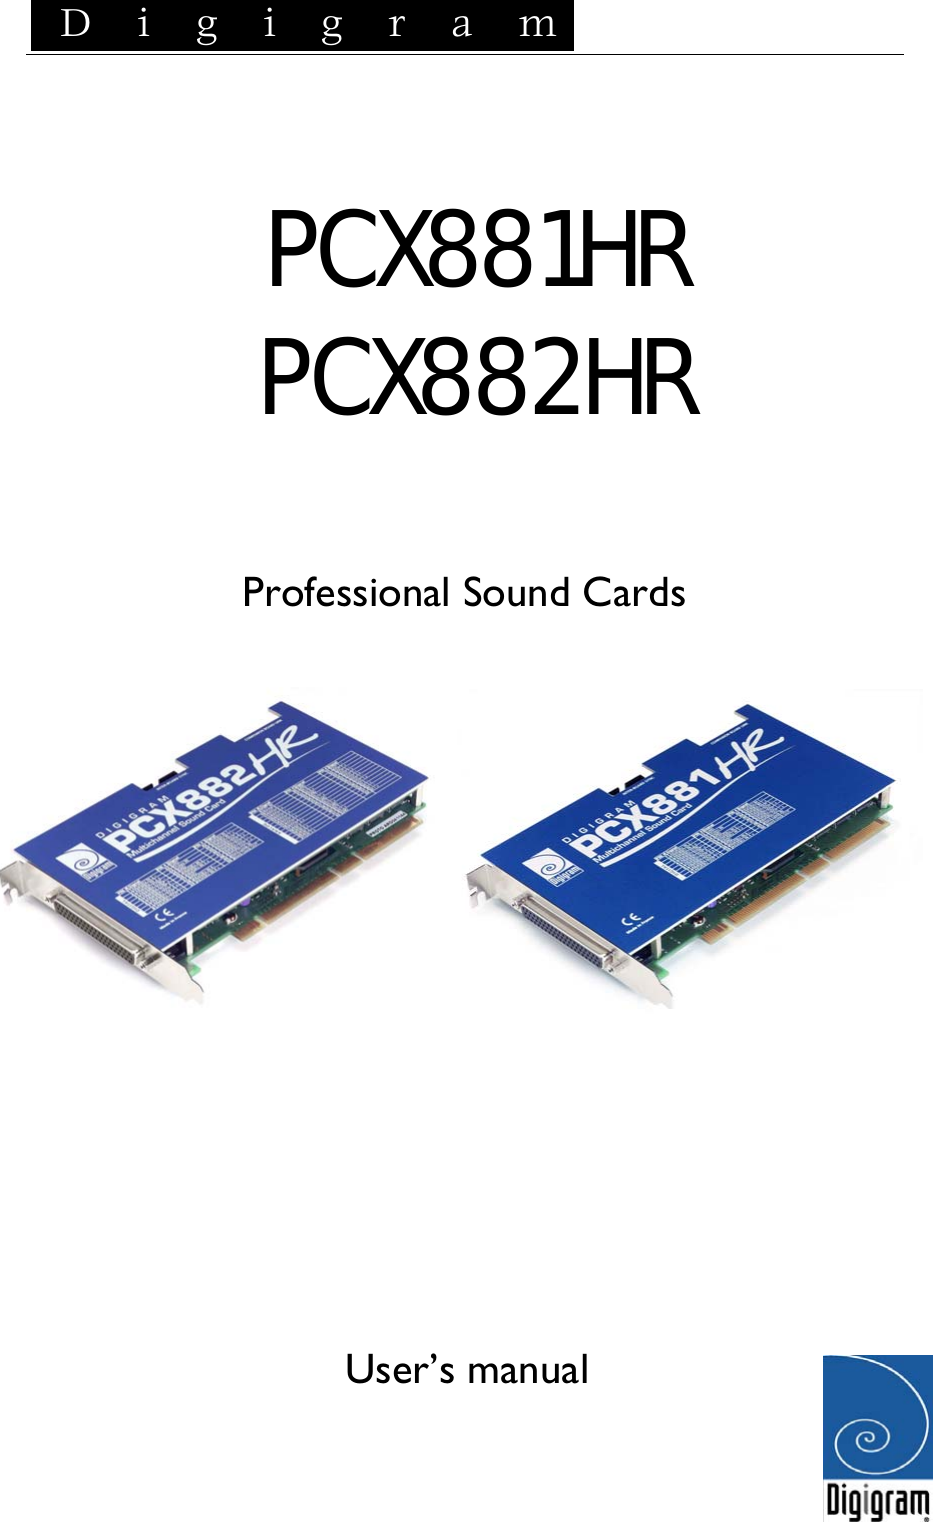  D i g i g r a m    PCX881HR PCX882HR   Professional Sound Cards       User’s manual   